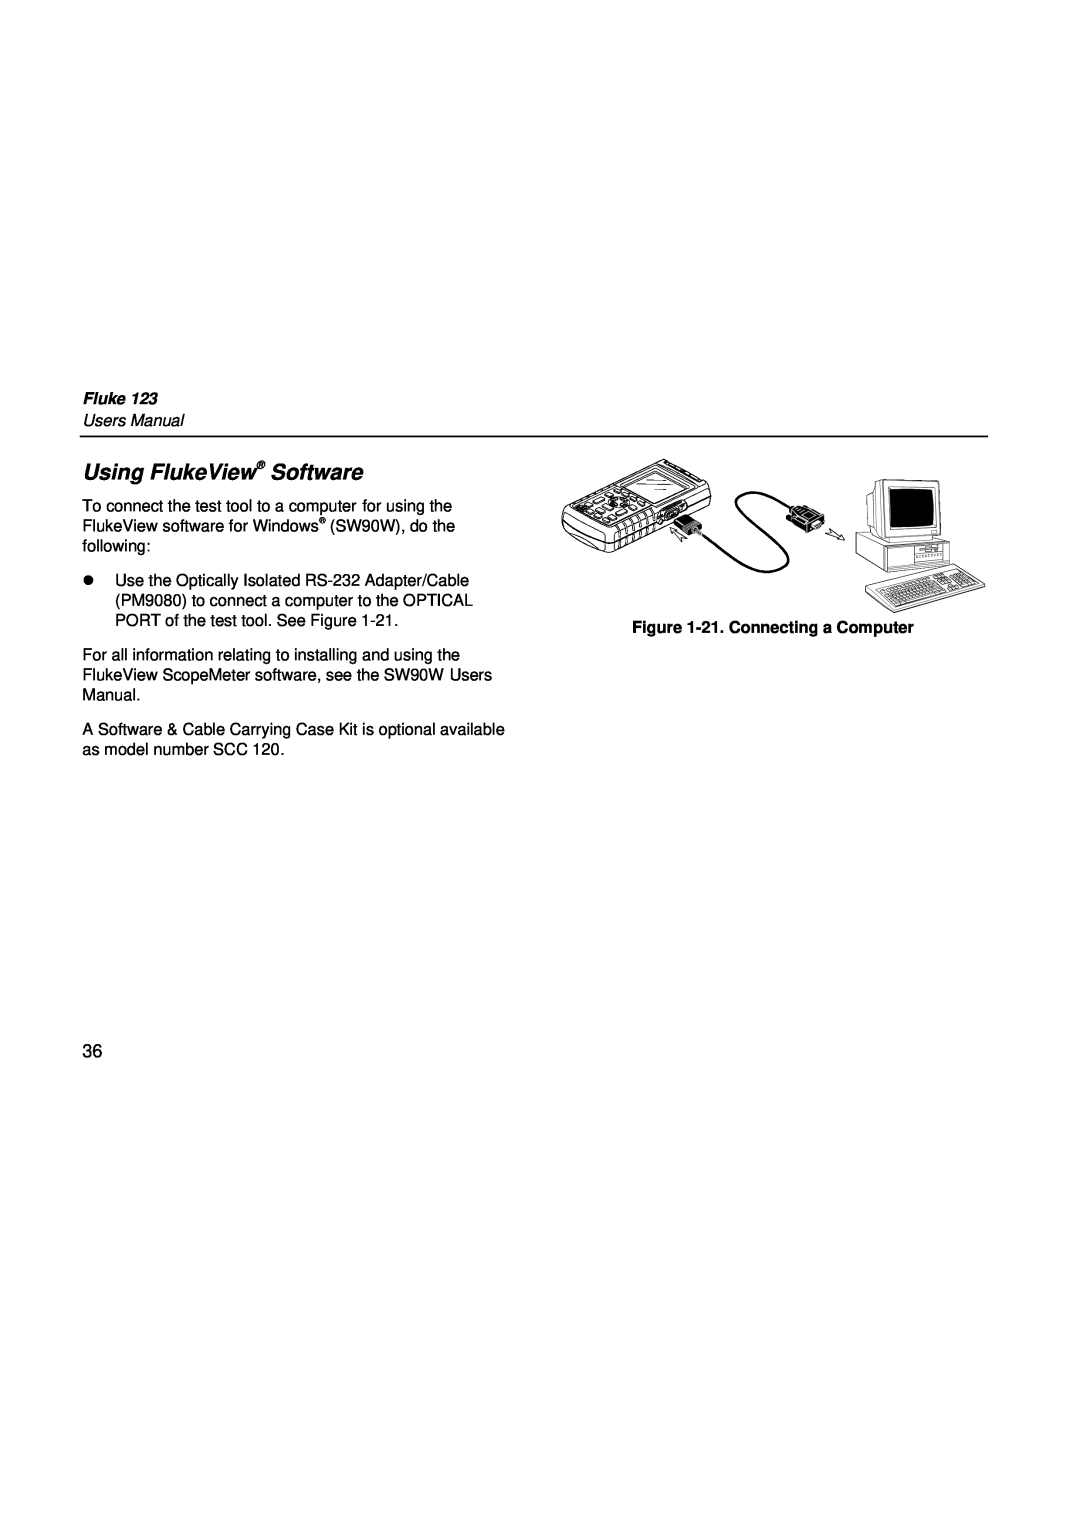 Fluke fluke123 user manual Using FlukeView Software, 21. Connecting a Computer, Users Manual 